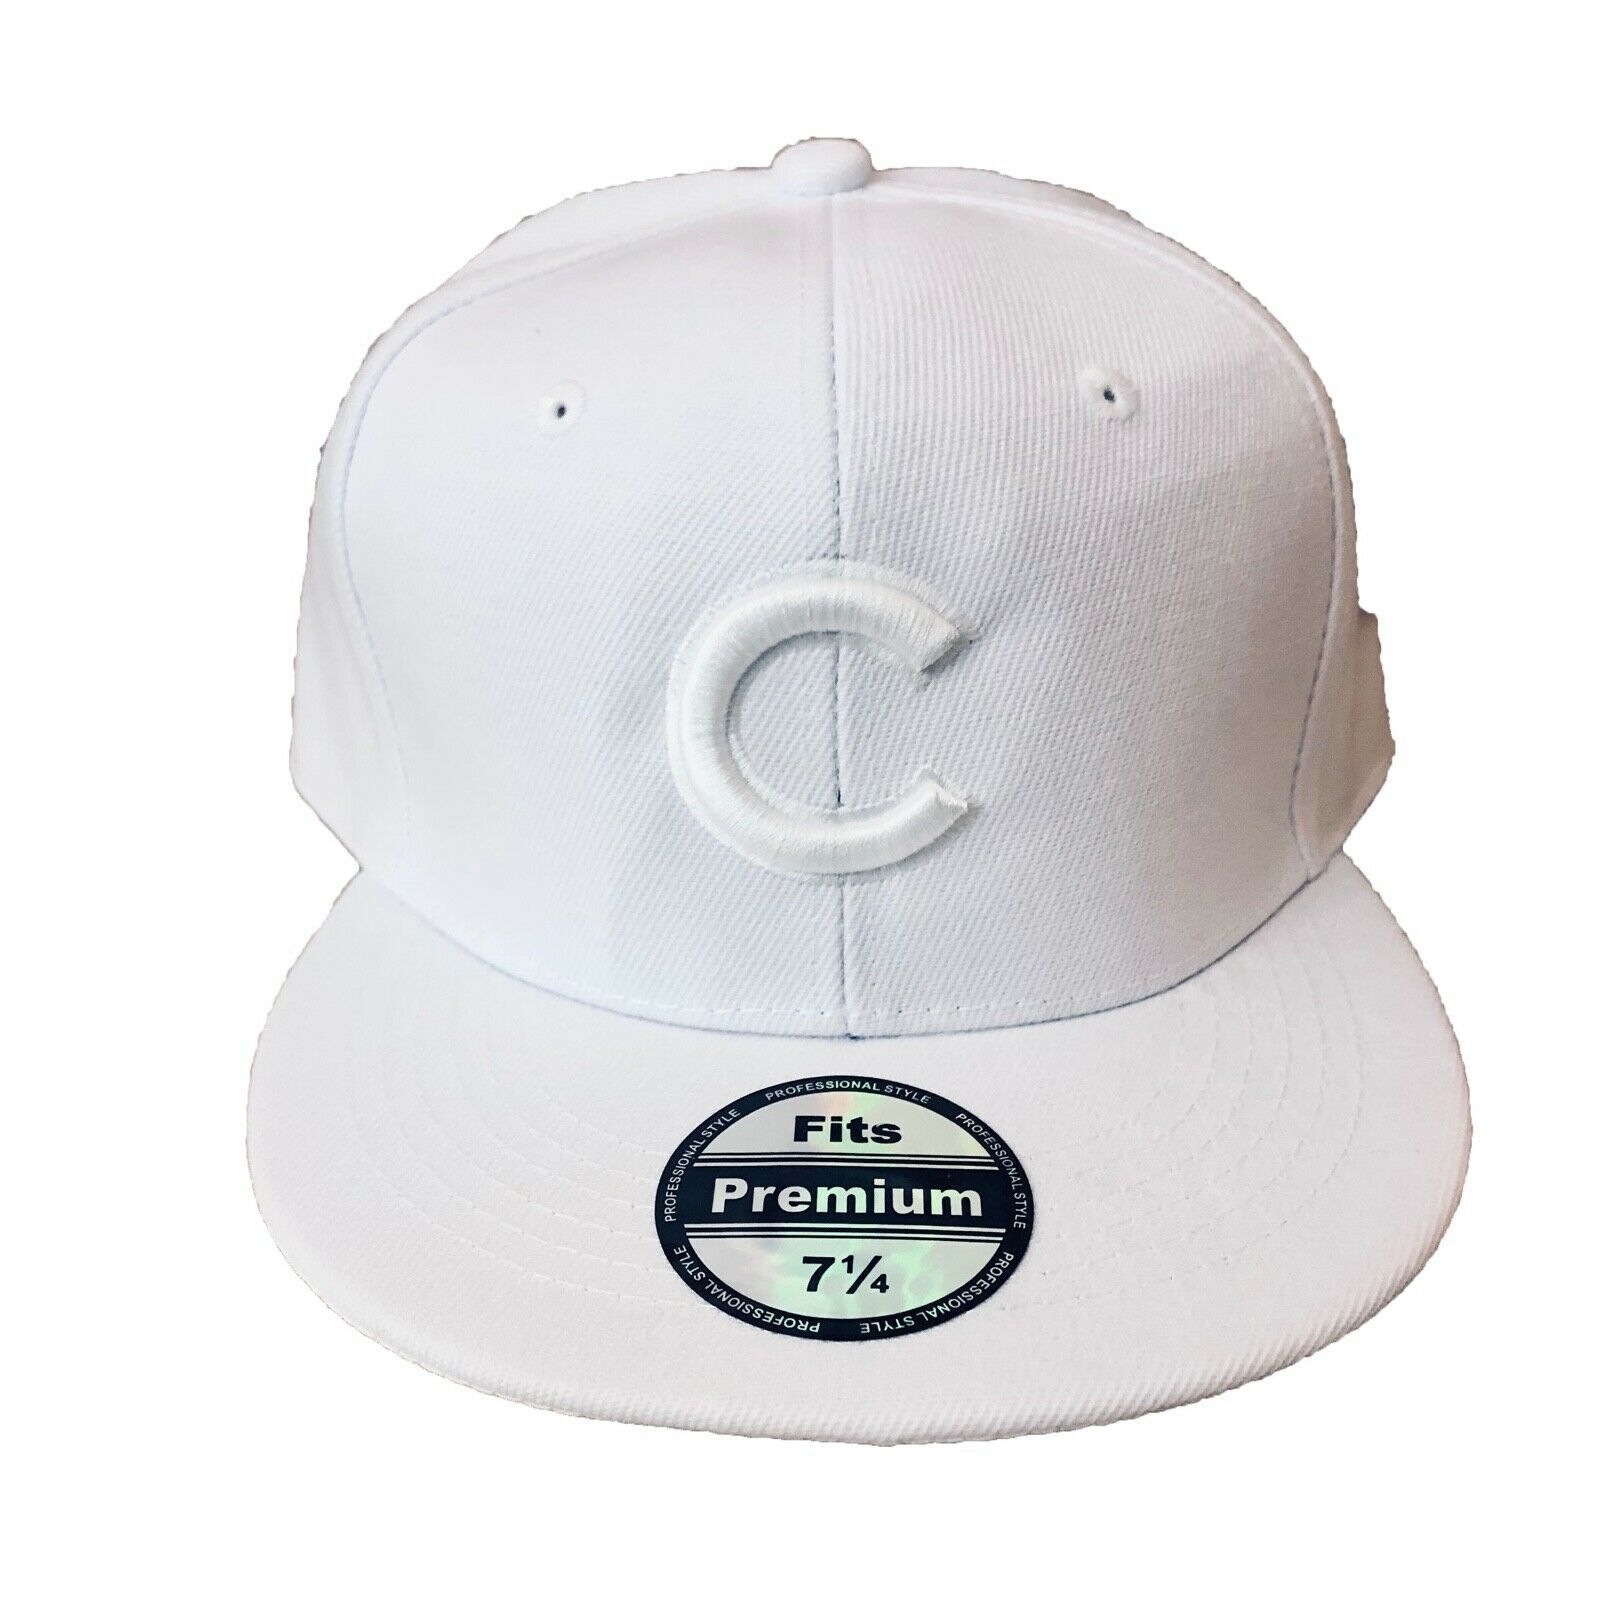 NEW Mens Chicago Cubs Baseball Cap Fitted Hat Multi Size White - Men's ...